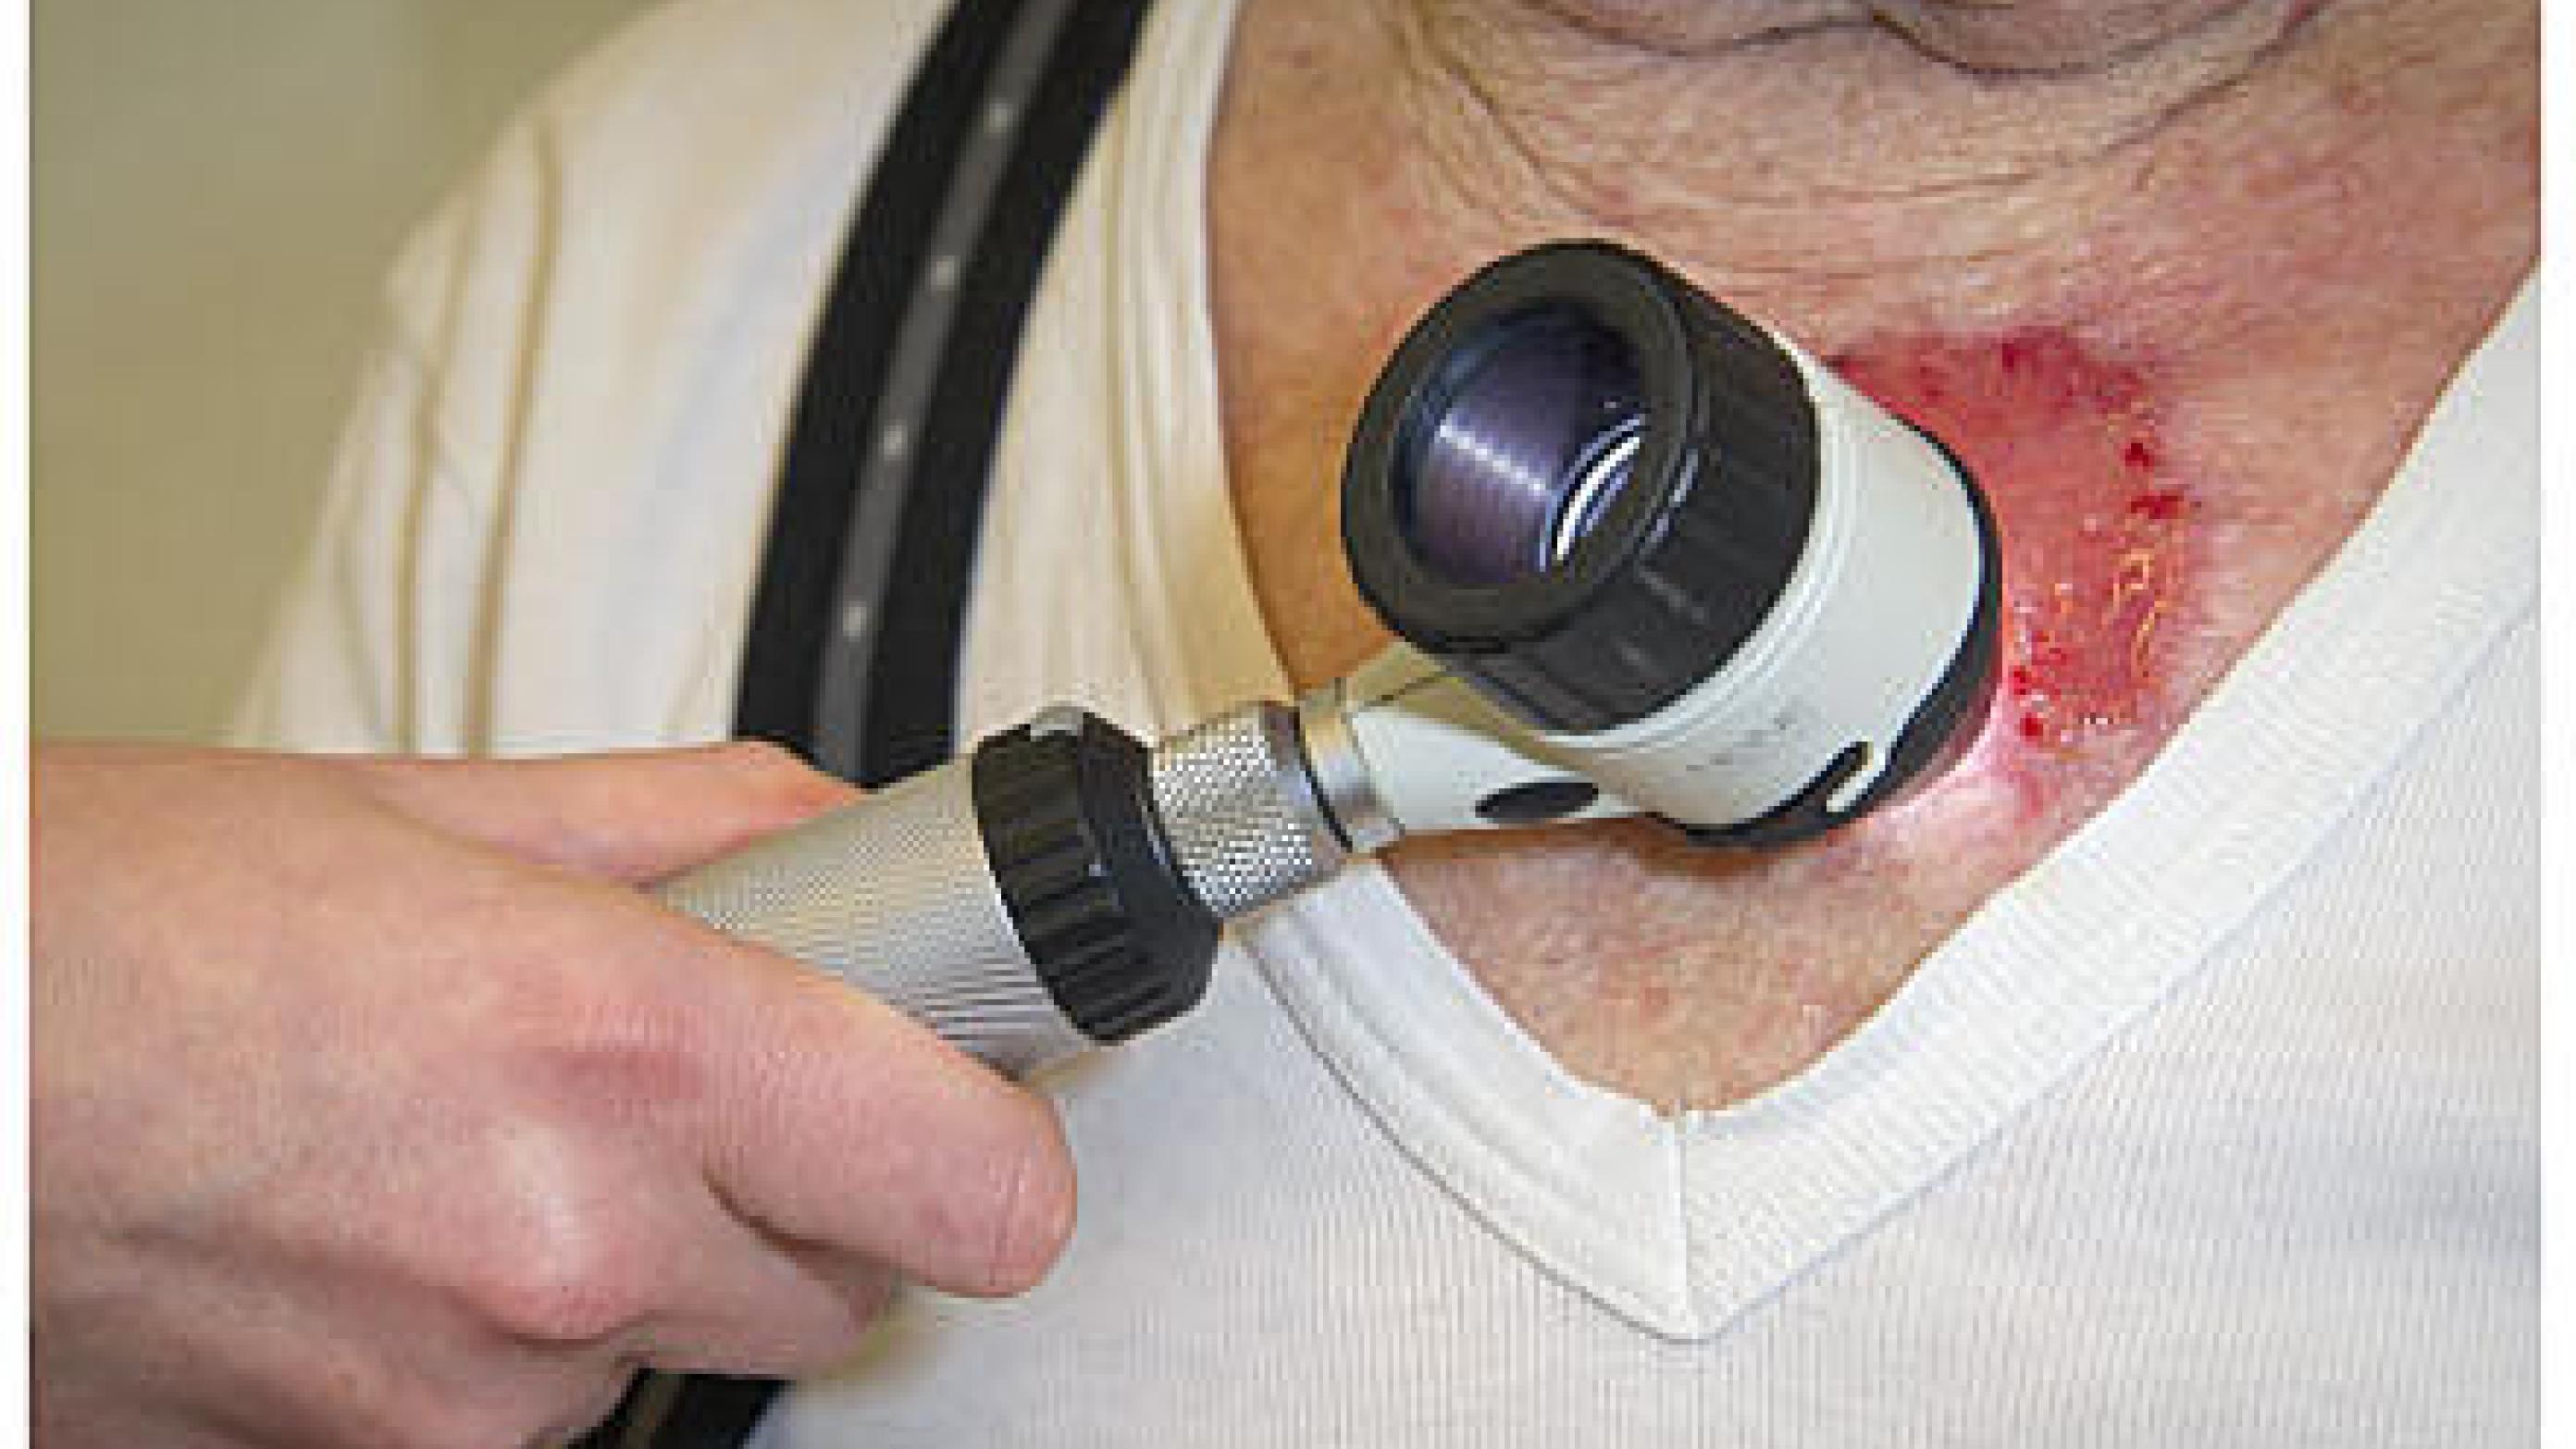 Skin cancer patients typically attend follow-up for several years after treatment. Photo: Karsten Kanding Christrup.